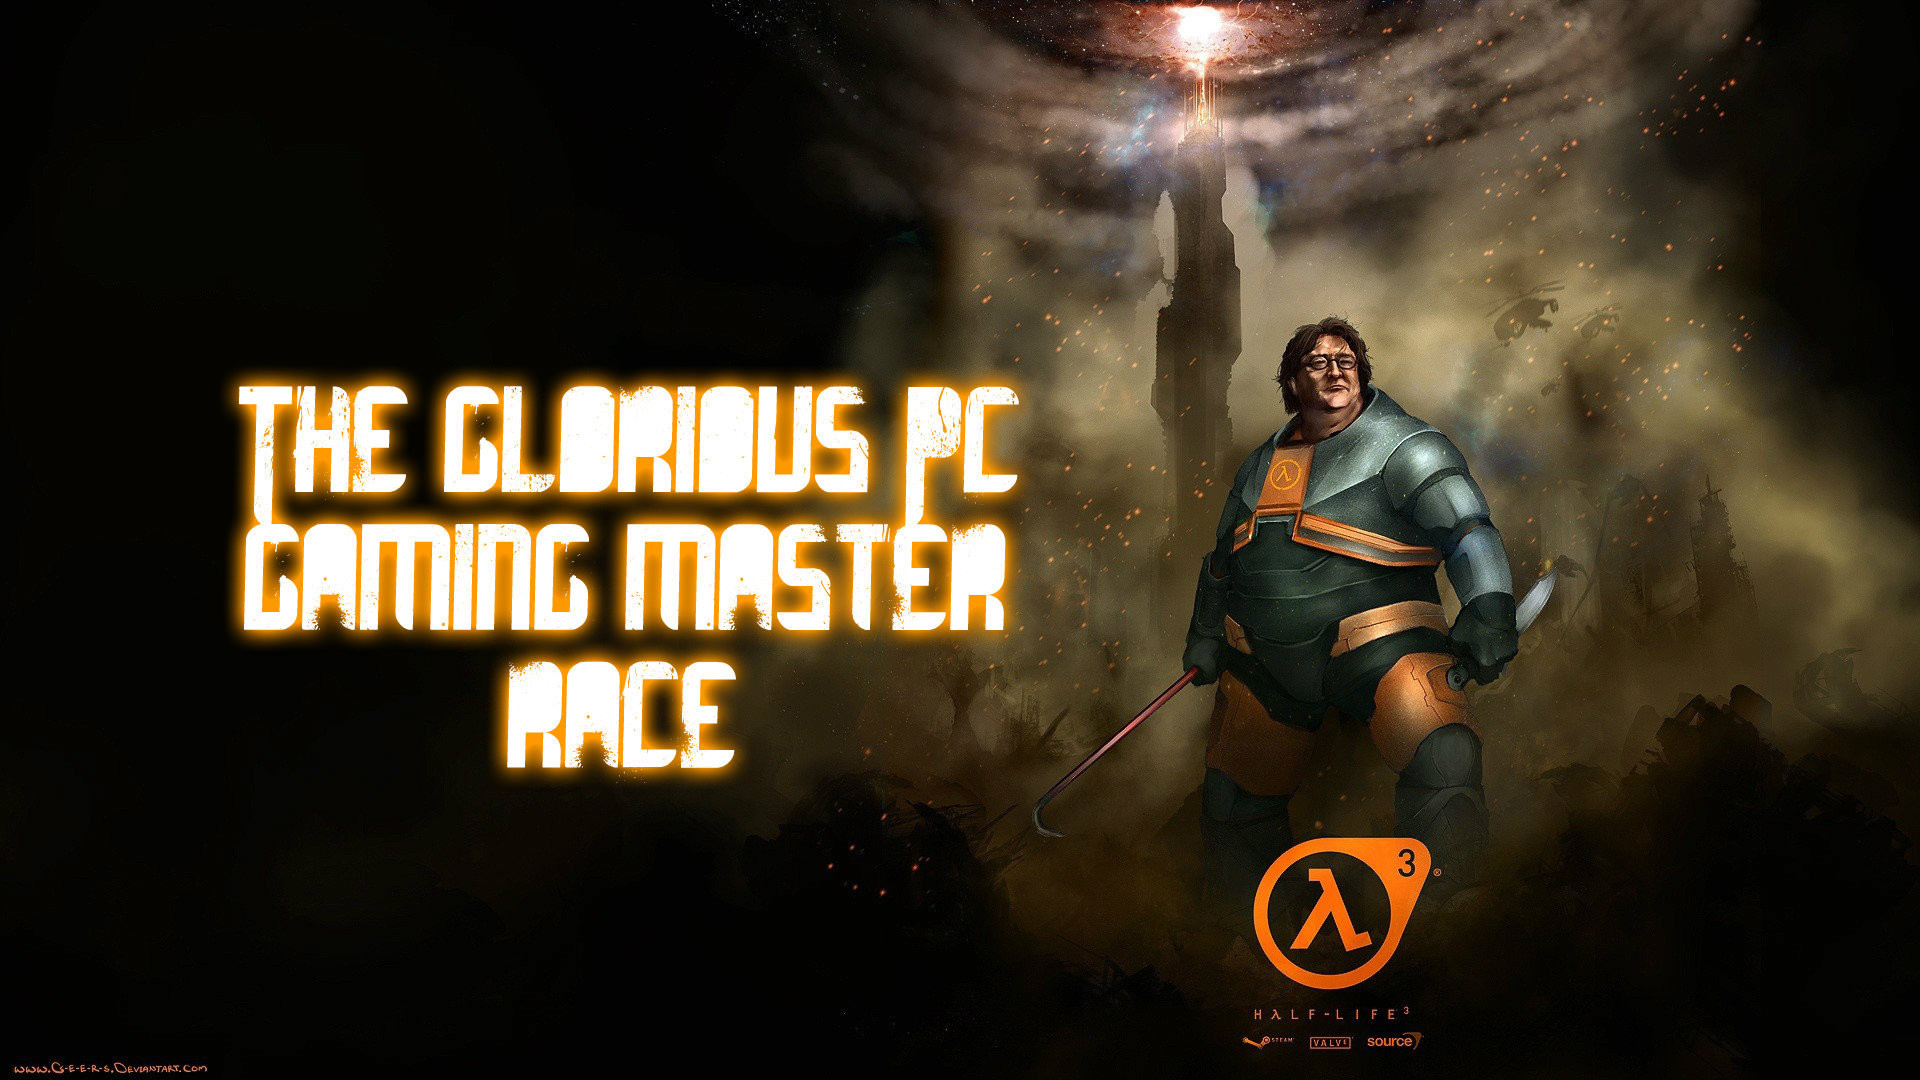 Any 1920x1080p Gaben wallpapers PC MASTER RACE – added